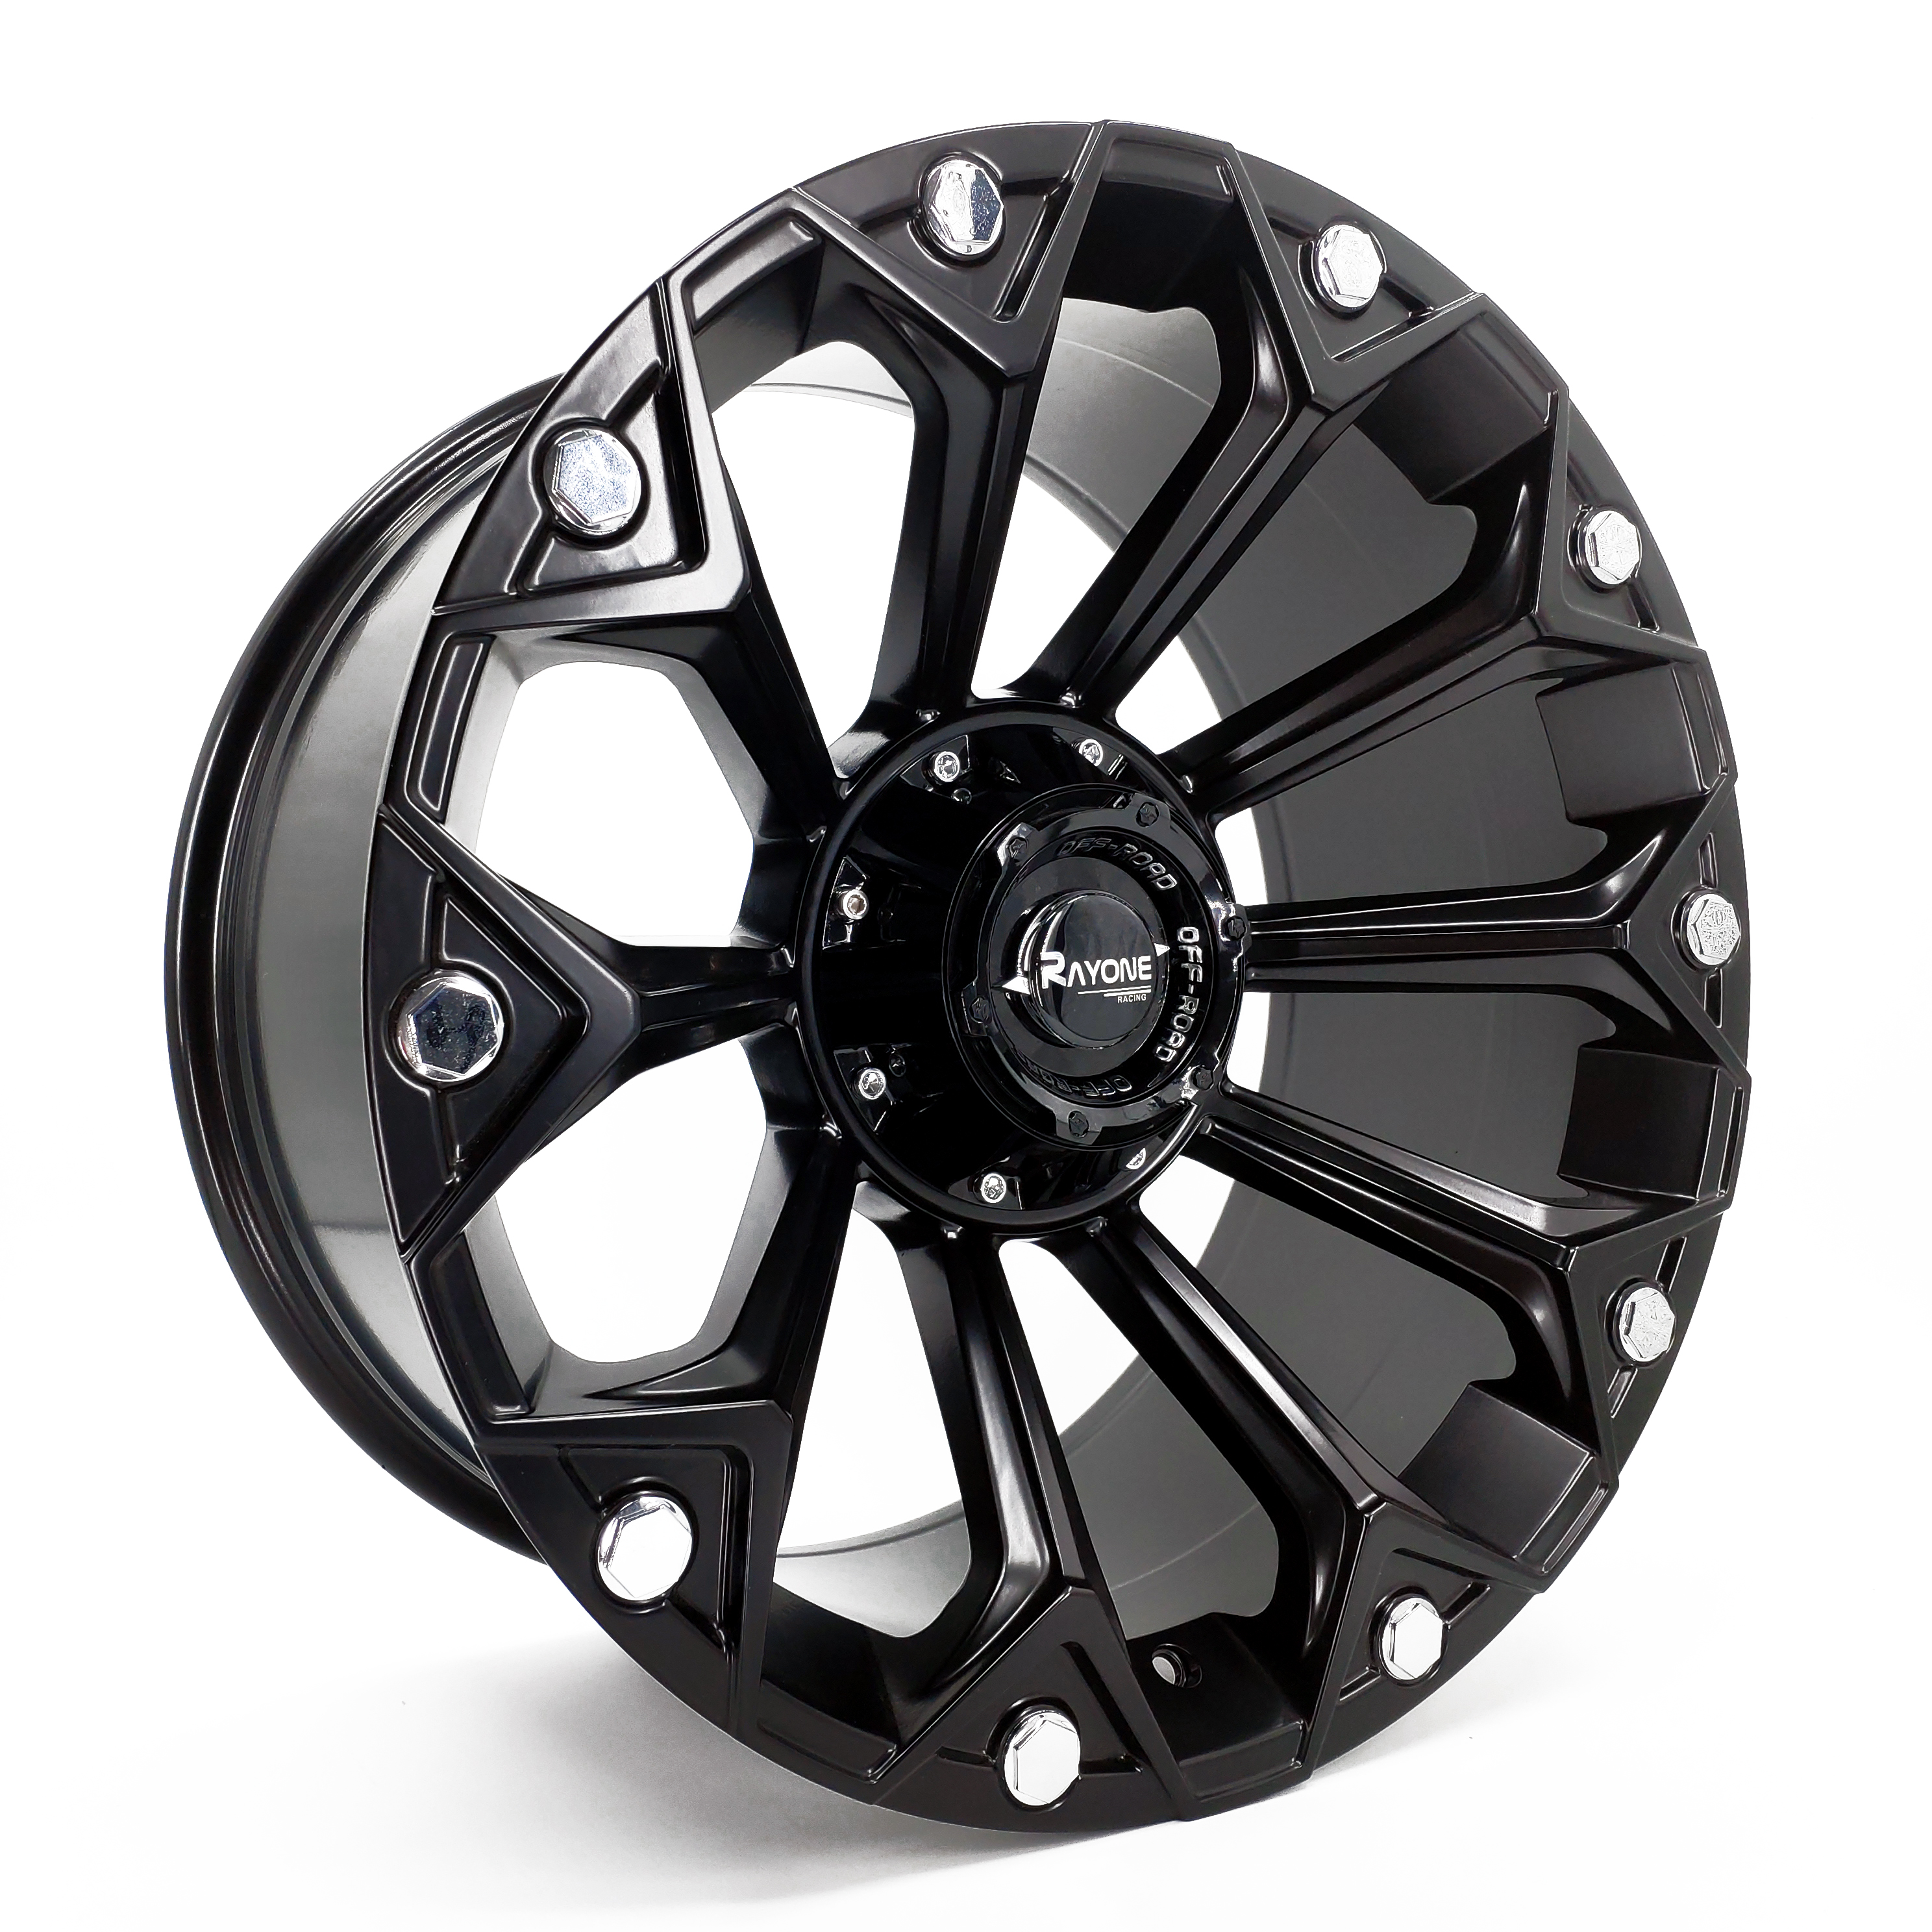 Rayone Racing Off-Road OR004 17inch 9.0J For Jeep